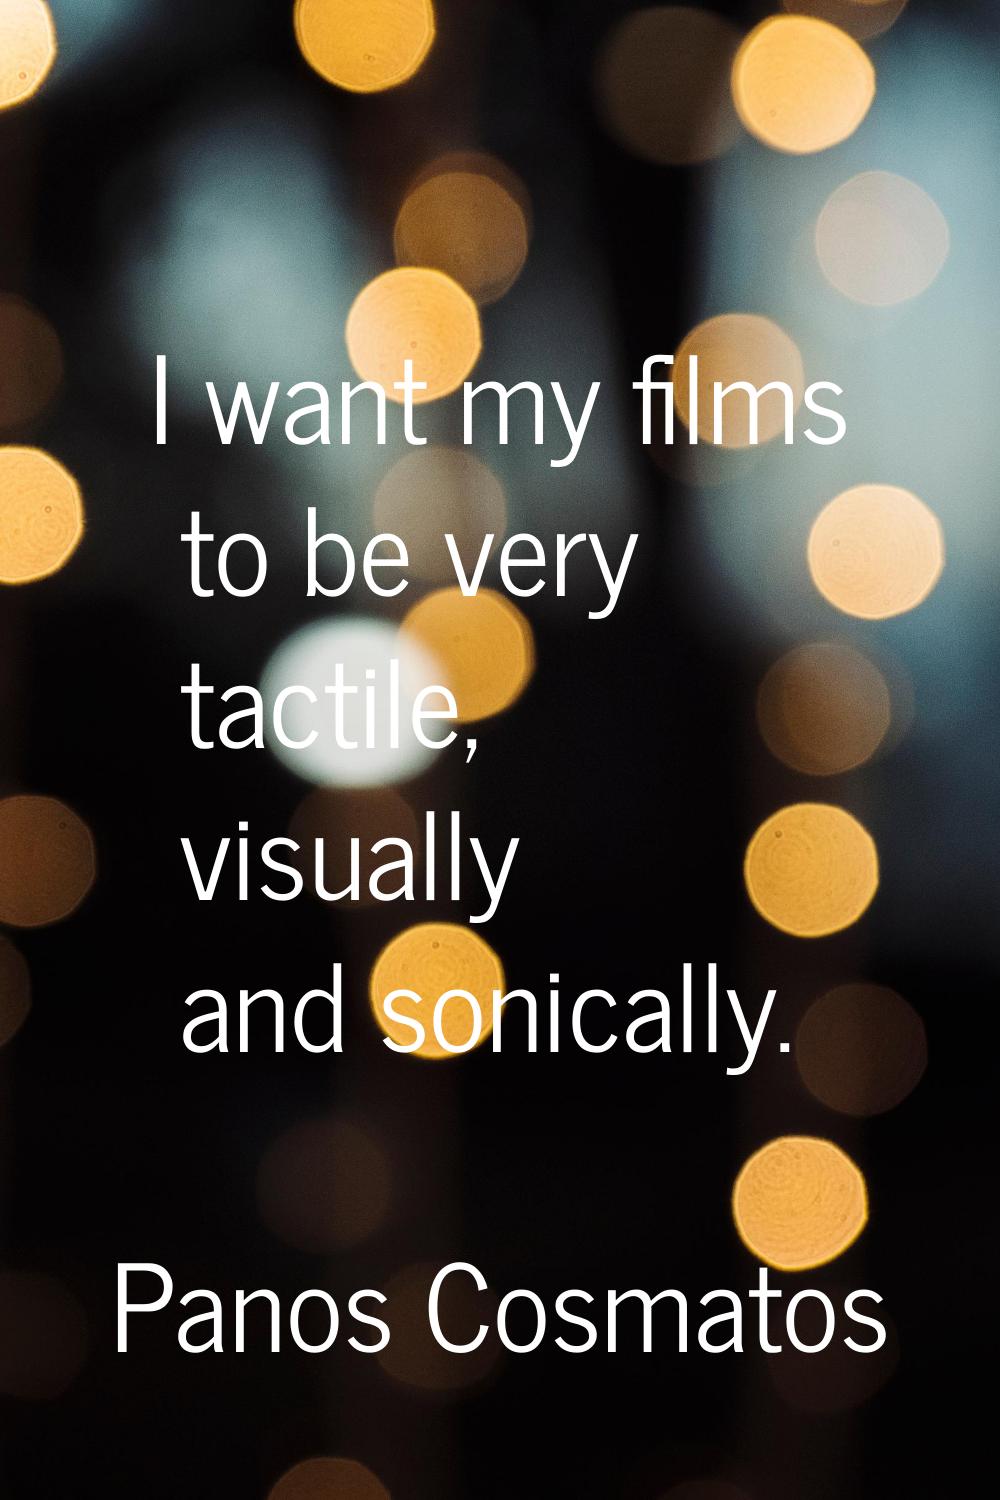 I want my films to be very tactile, visually and sonically.